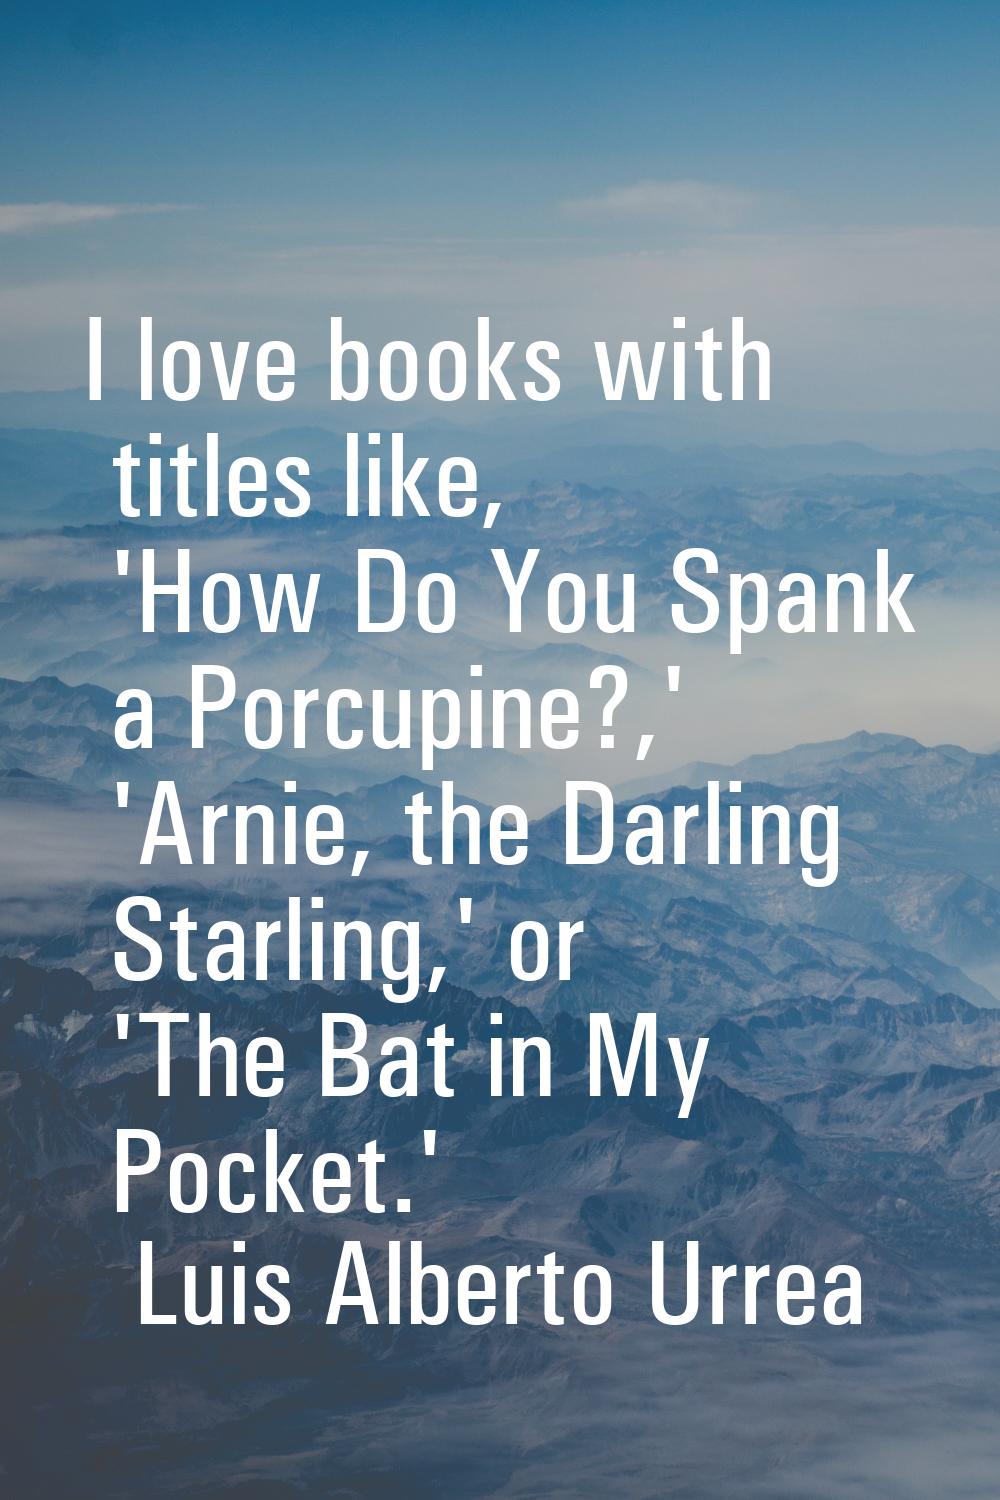 I love books with titles like, 'How Do You Spank a Porcupine?,' 'Arnie, the Darling Starling,' or '